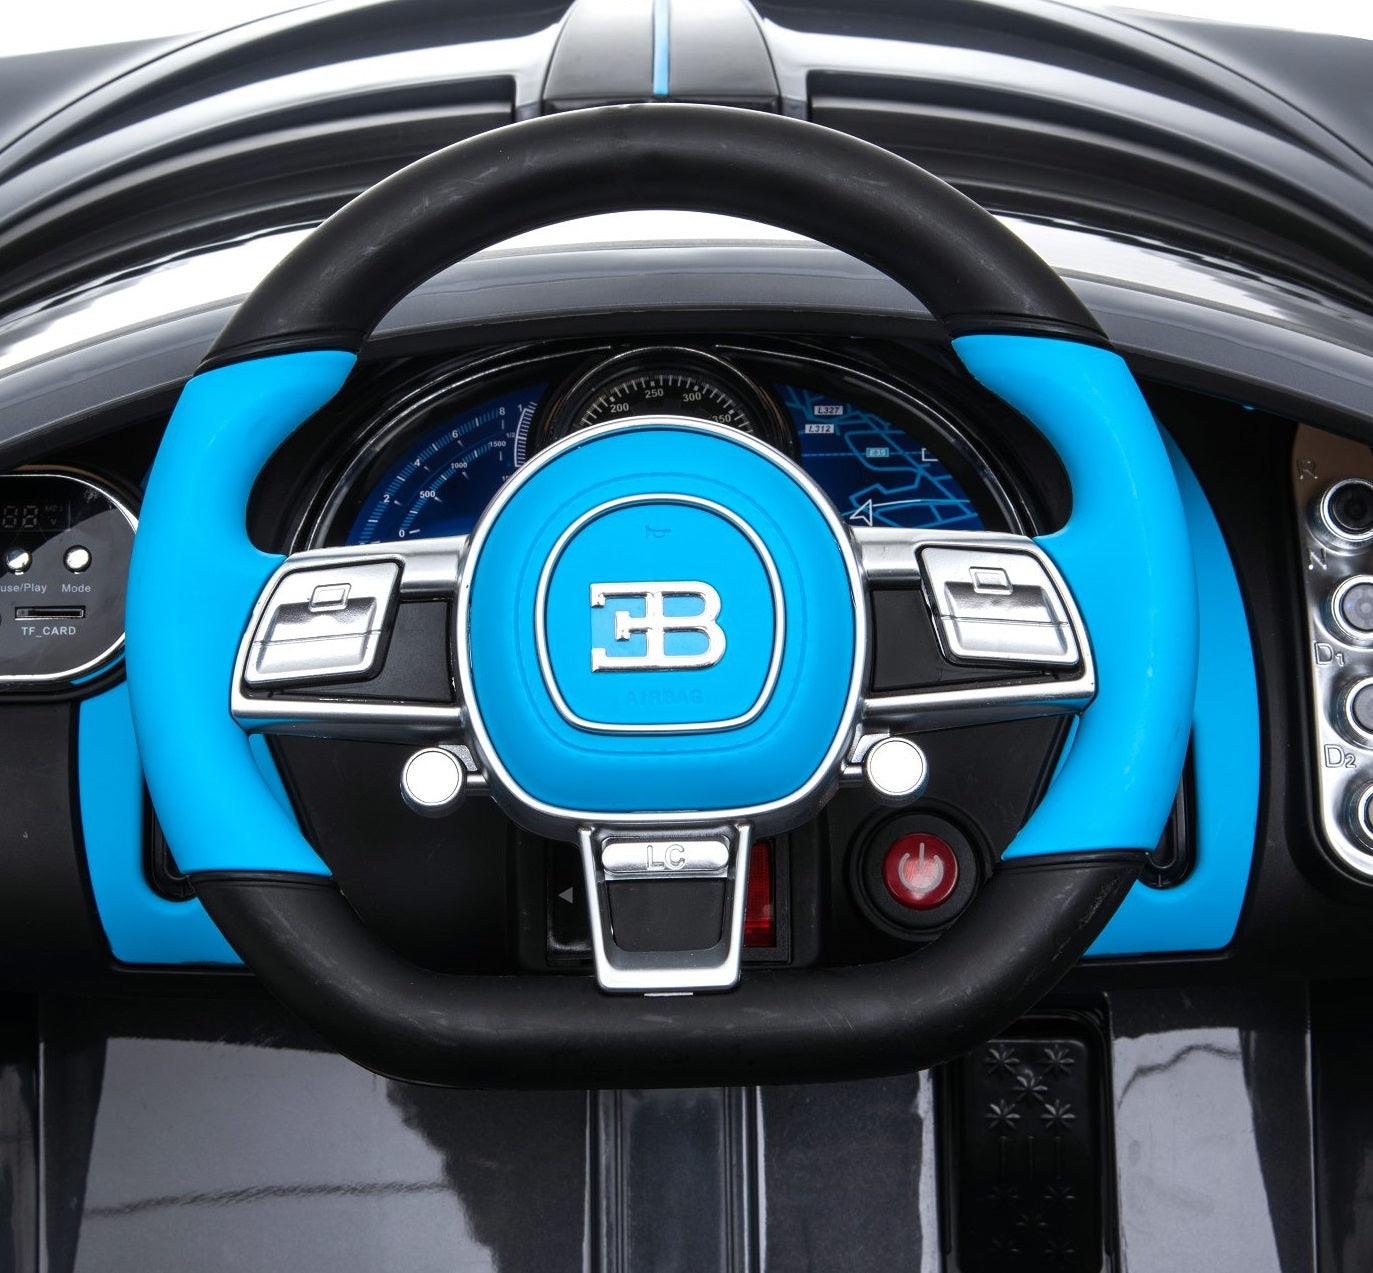 Compatible Steering Wheel for Ride on Cars - DTI Direct Canada